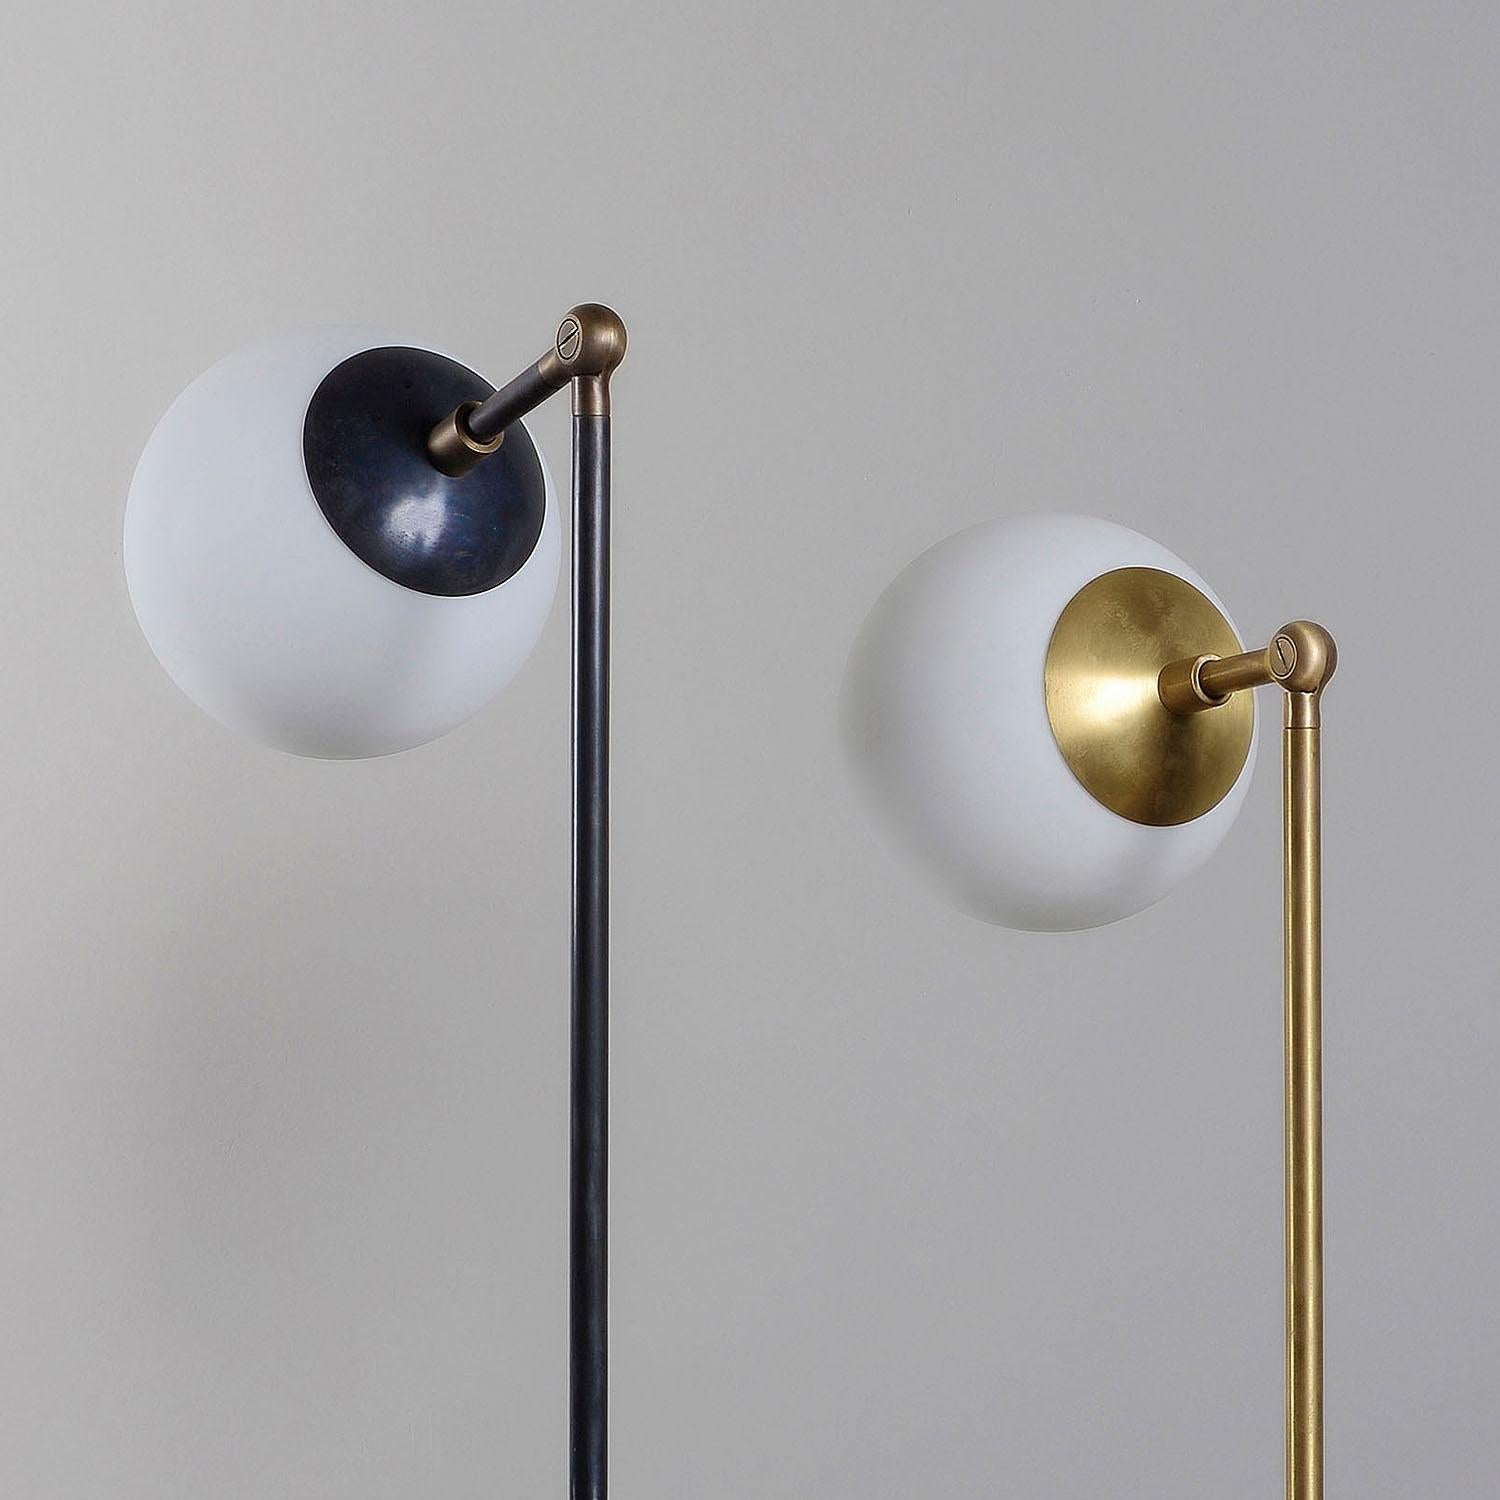 Contemporary Sculpted Brass & Glass Pendant, Tango One Globe by Paul Matter

Tango is born from playful experimentation with vintage lighting components.
Burnt, aged brass and etched glass are combined to create lighting fixtures that fuse